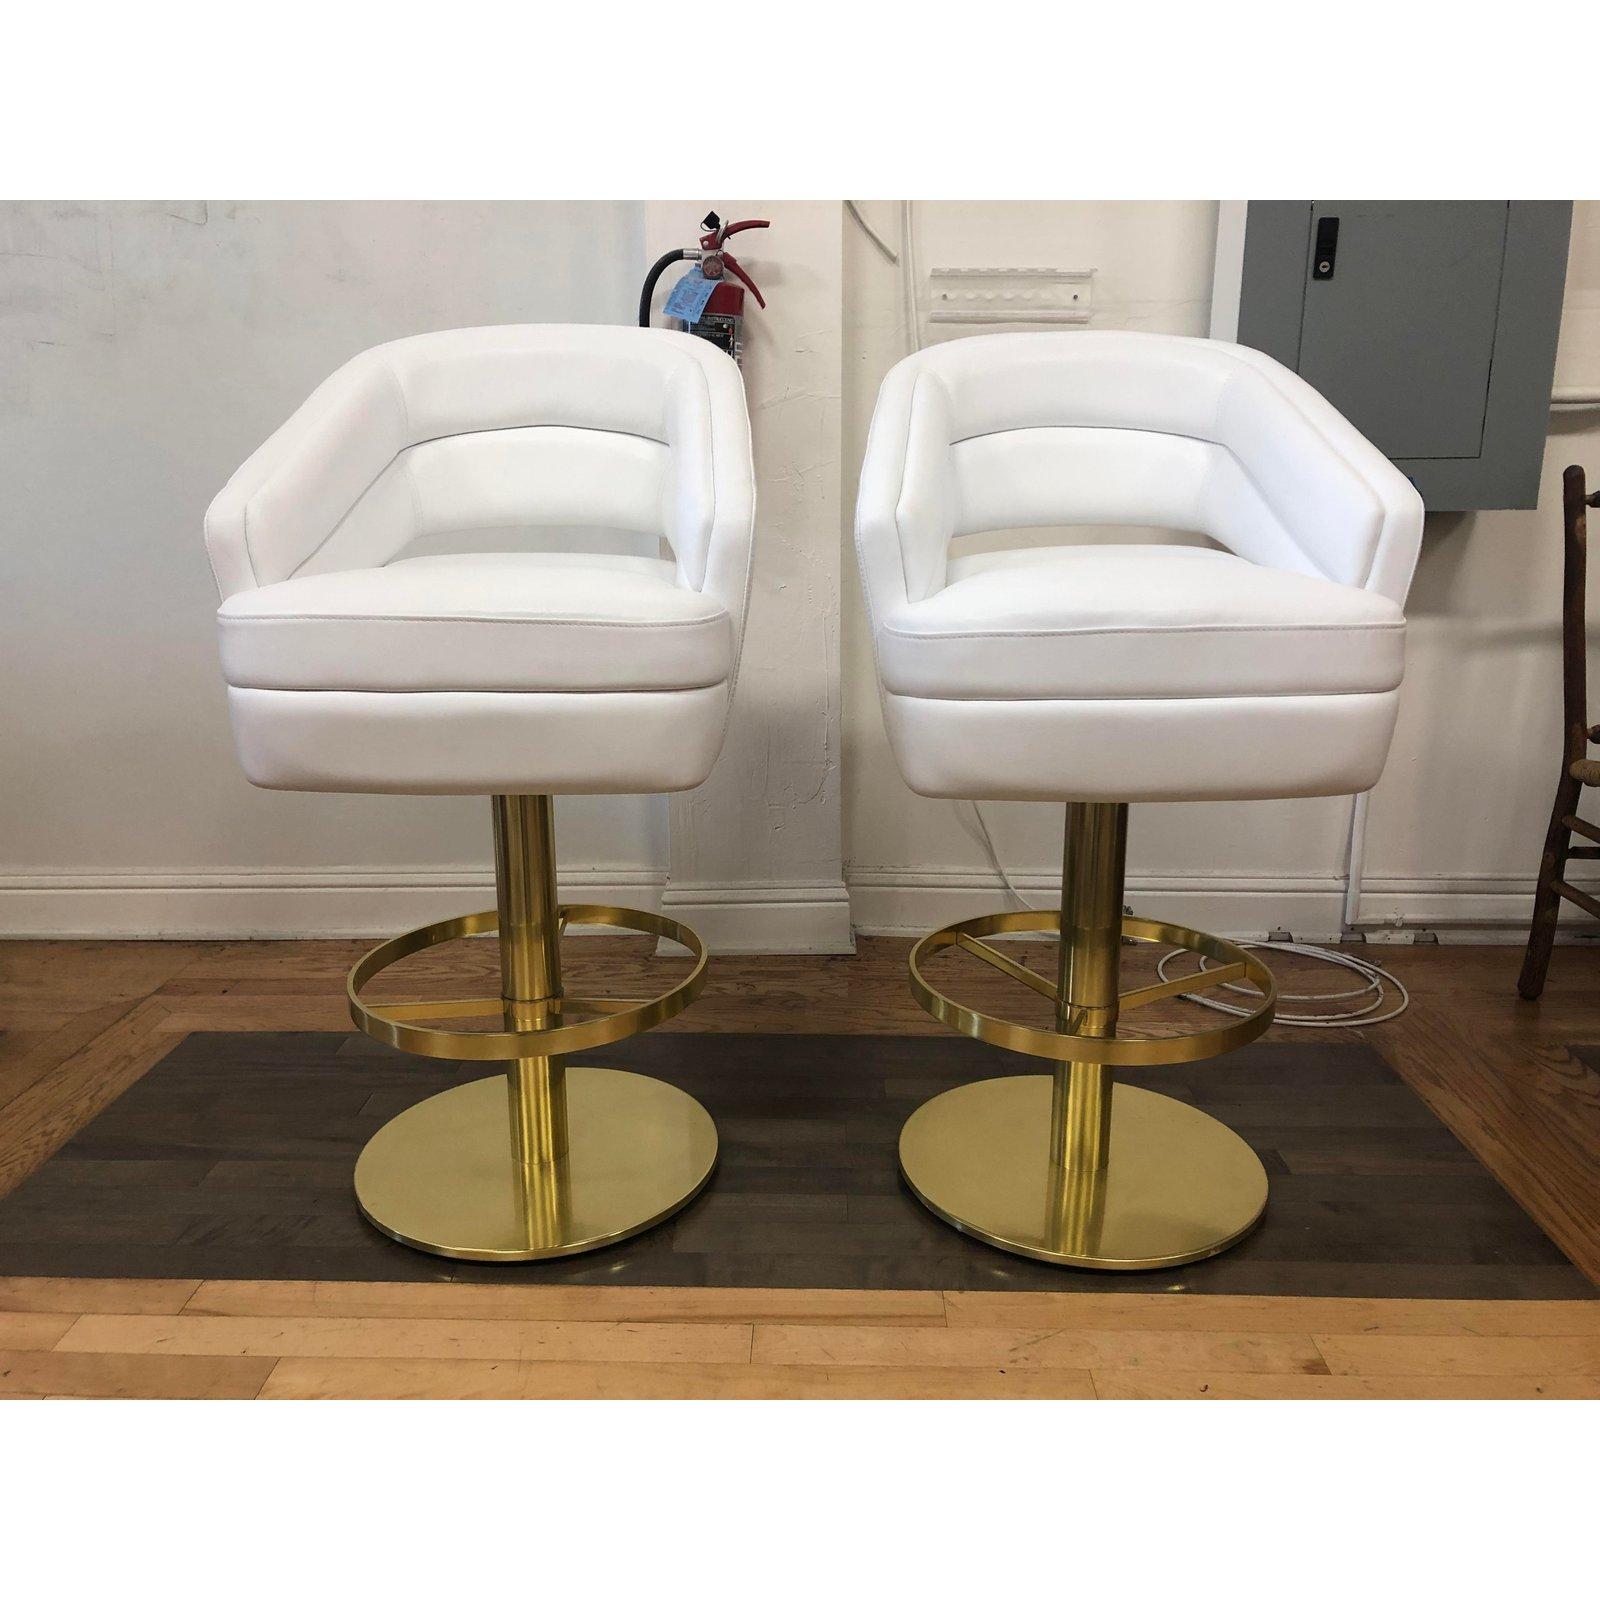 Pair of New Russel Barstools by Essential Homes In Good Condition For Sale In San Francisco, CA